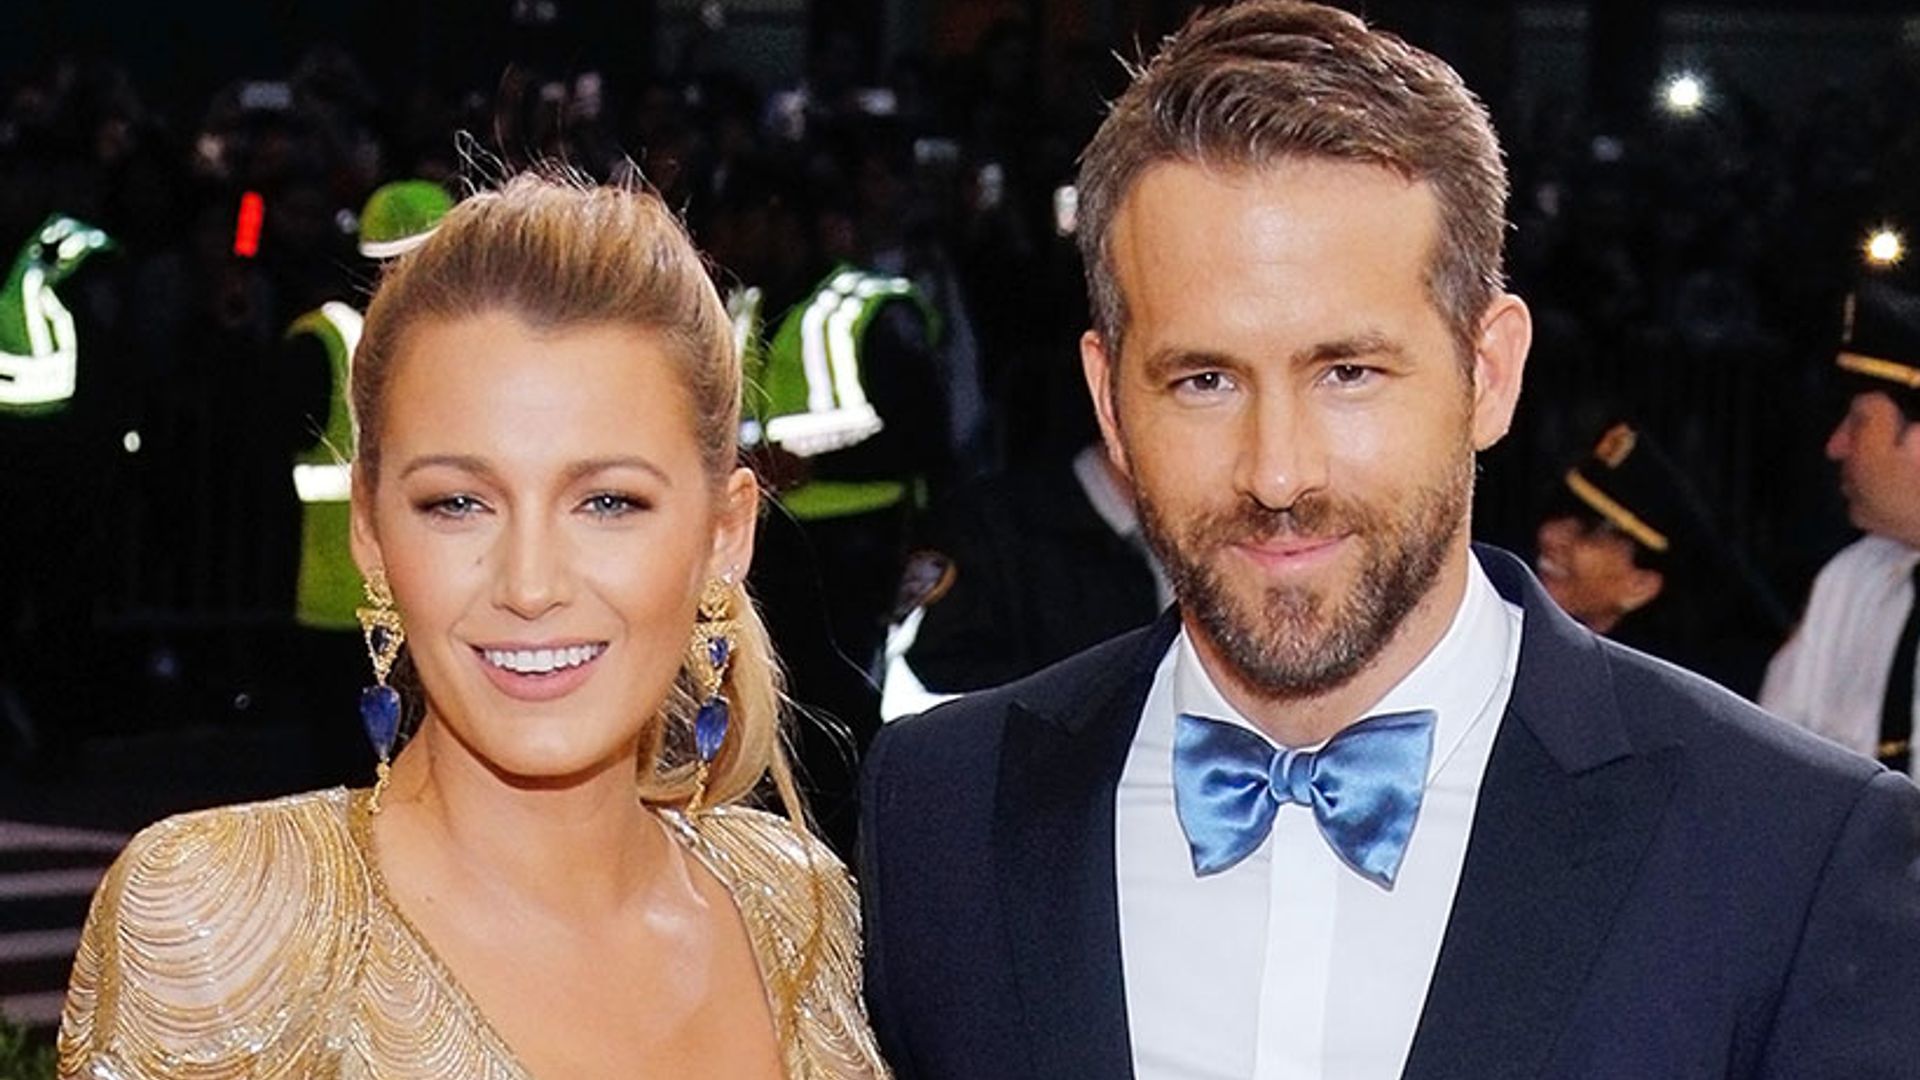 Blake Lively gets sweet birthday revenge on husband Ryan Reynolds with this hilarious photo